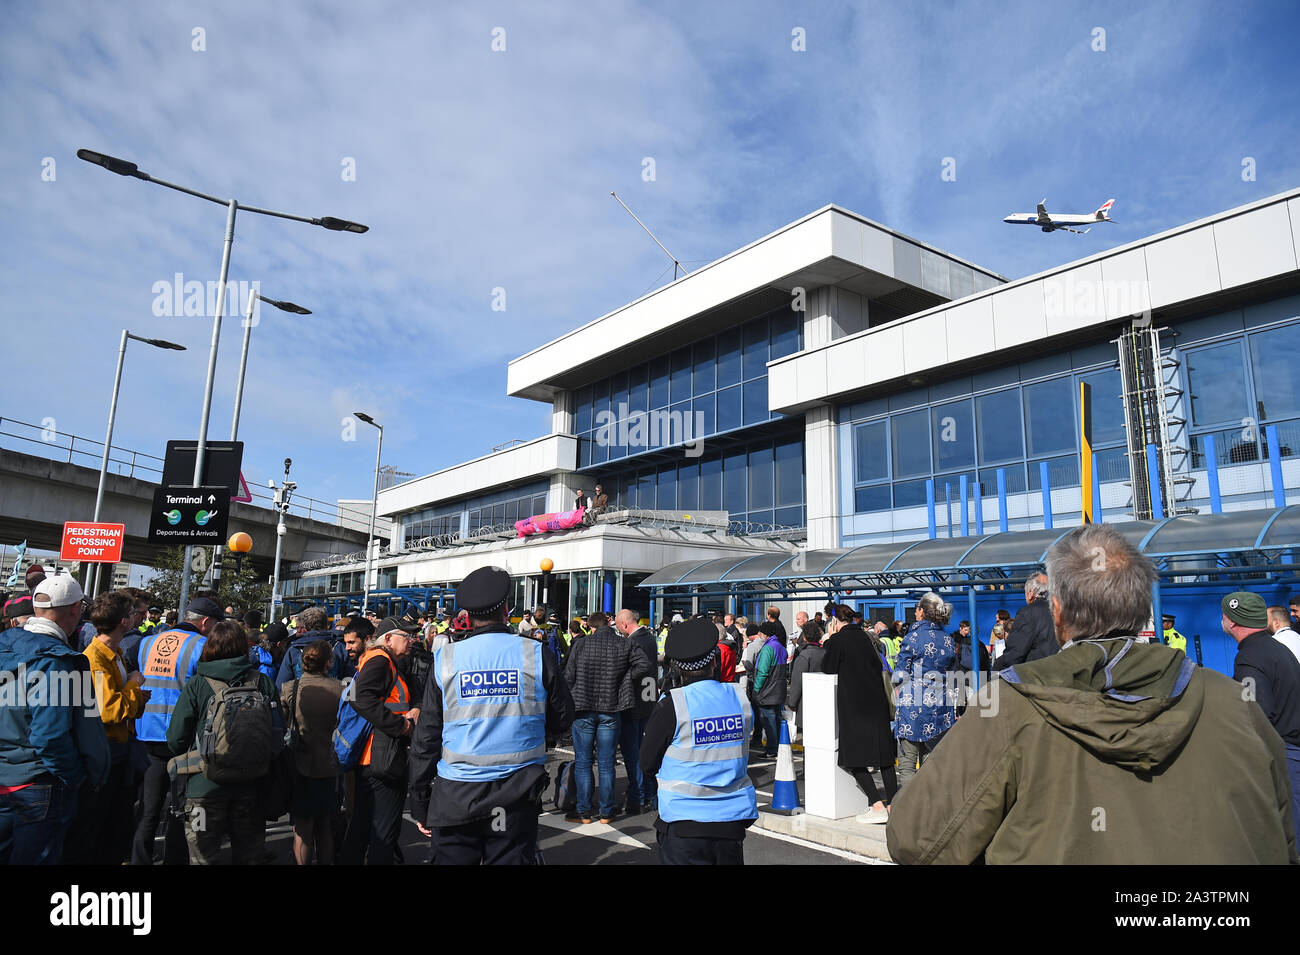 Protesters at City Airport, London, during an Extinction Rebellion climate change protest. Stock Photo